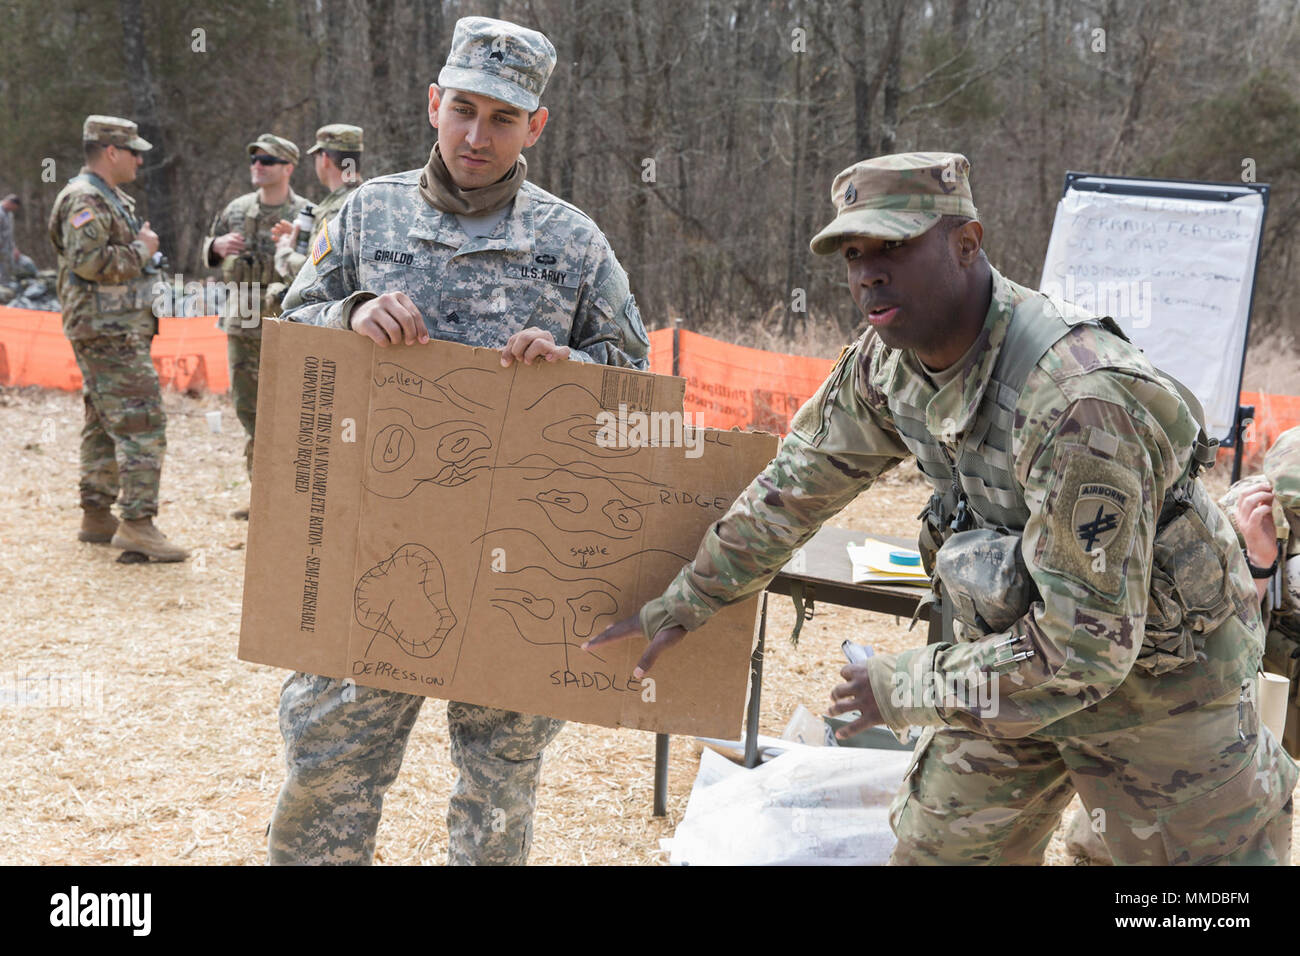 U.S. Army Reserve Staff Sgt. Levon T. Wilson, with the 437th Civil Affairs Battalion, 364th Civil Affairs Brigade, Ft. Story, Virginia, instructs a class on land navigation during the Combat Support Training Exercise (CSTX) at Fort Knox, Kentucky, March 18, 2018. CSTX 78-18-03 is a Combat Support Training Exercise that ensures America's Army Reserve units and Soldiers are trained and ready to deploy on short-notice and bring capable, combat-ready, and lethal firepower in support of the Army and our joint partners anywhere in the world. (U.S. Army Stock Photo